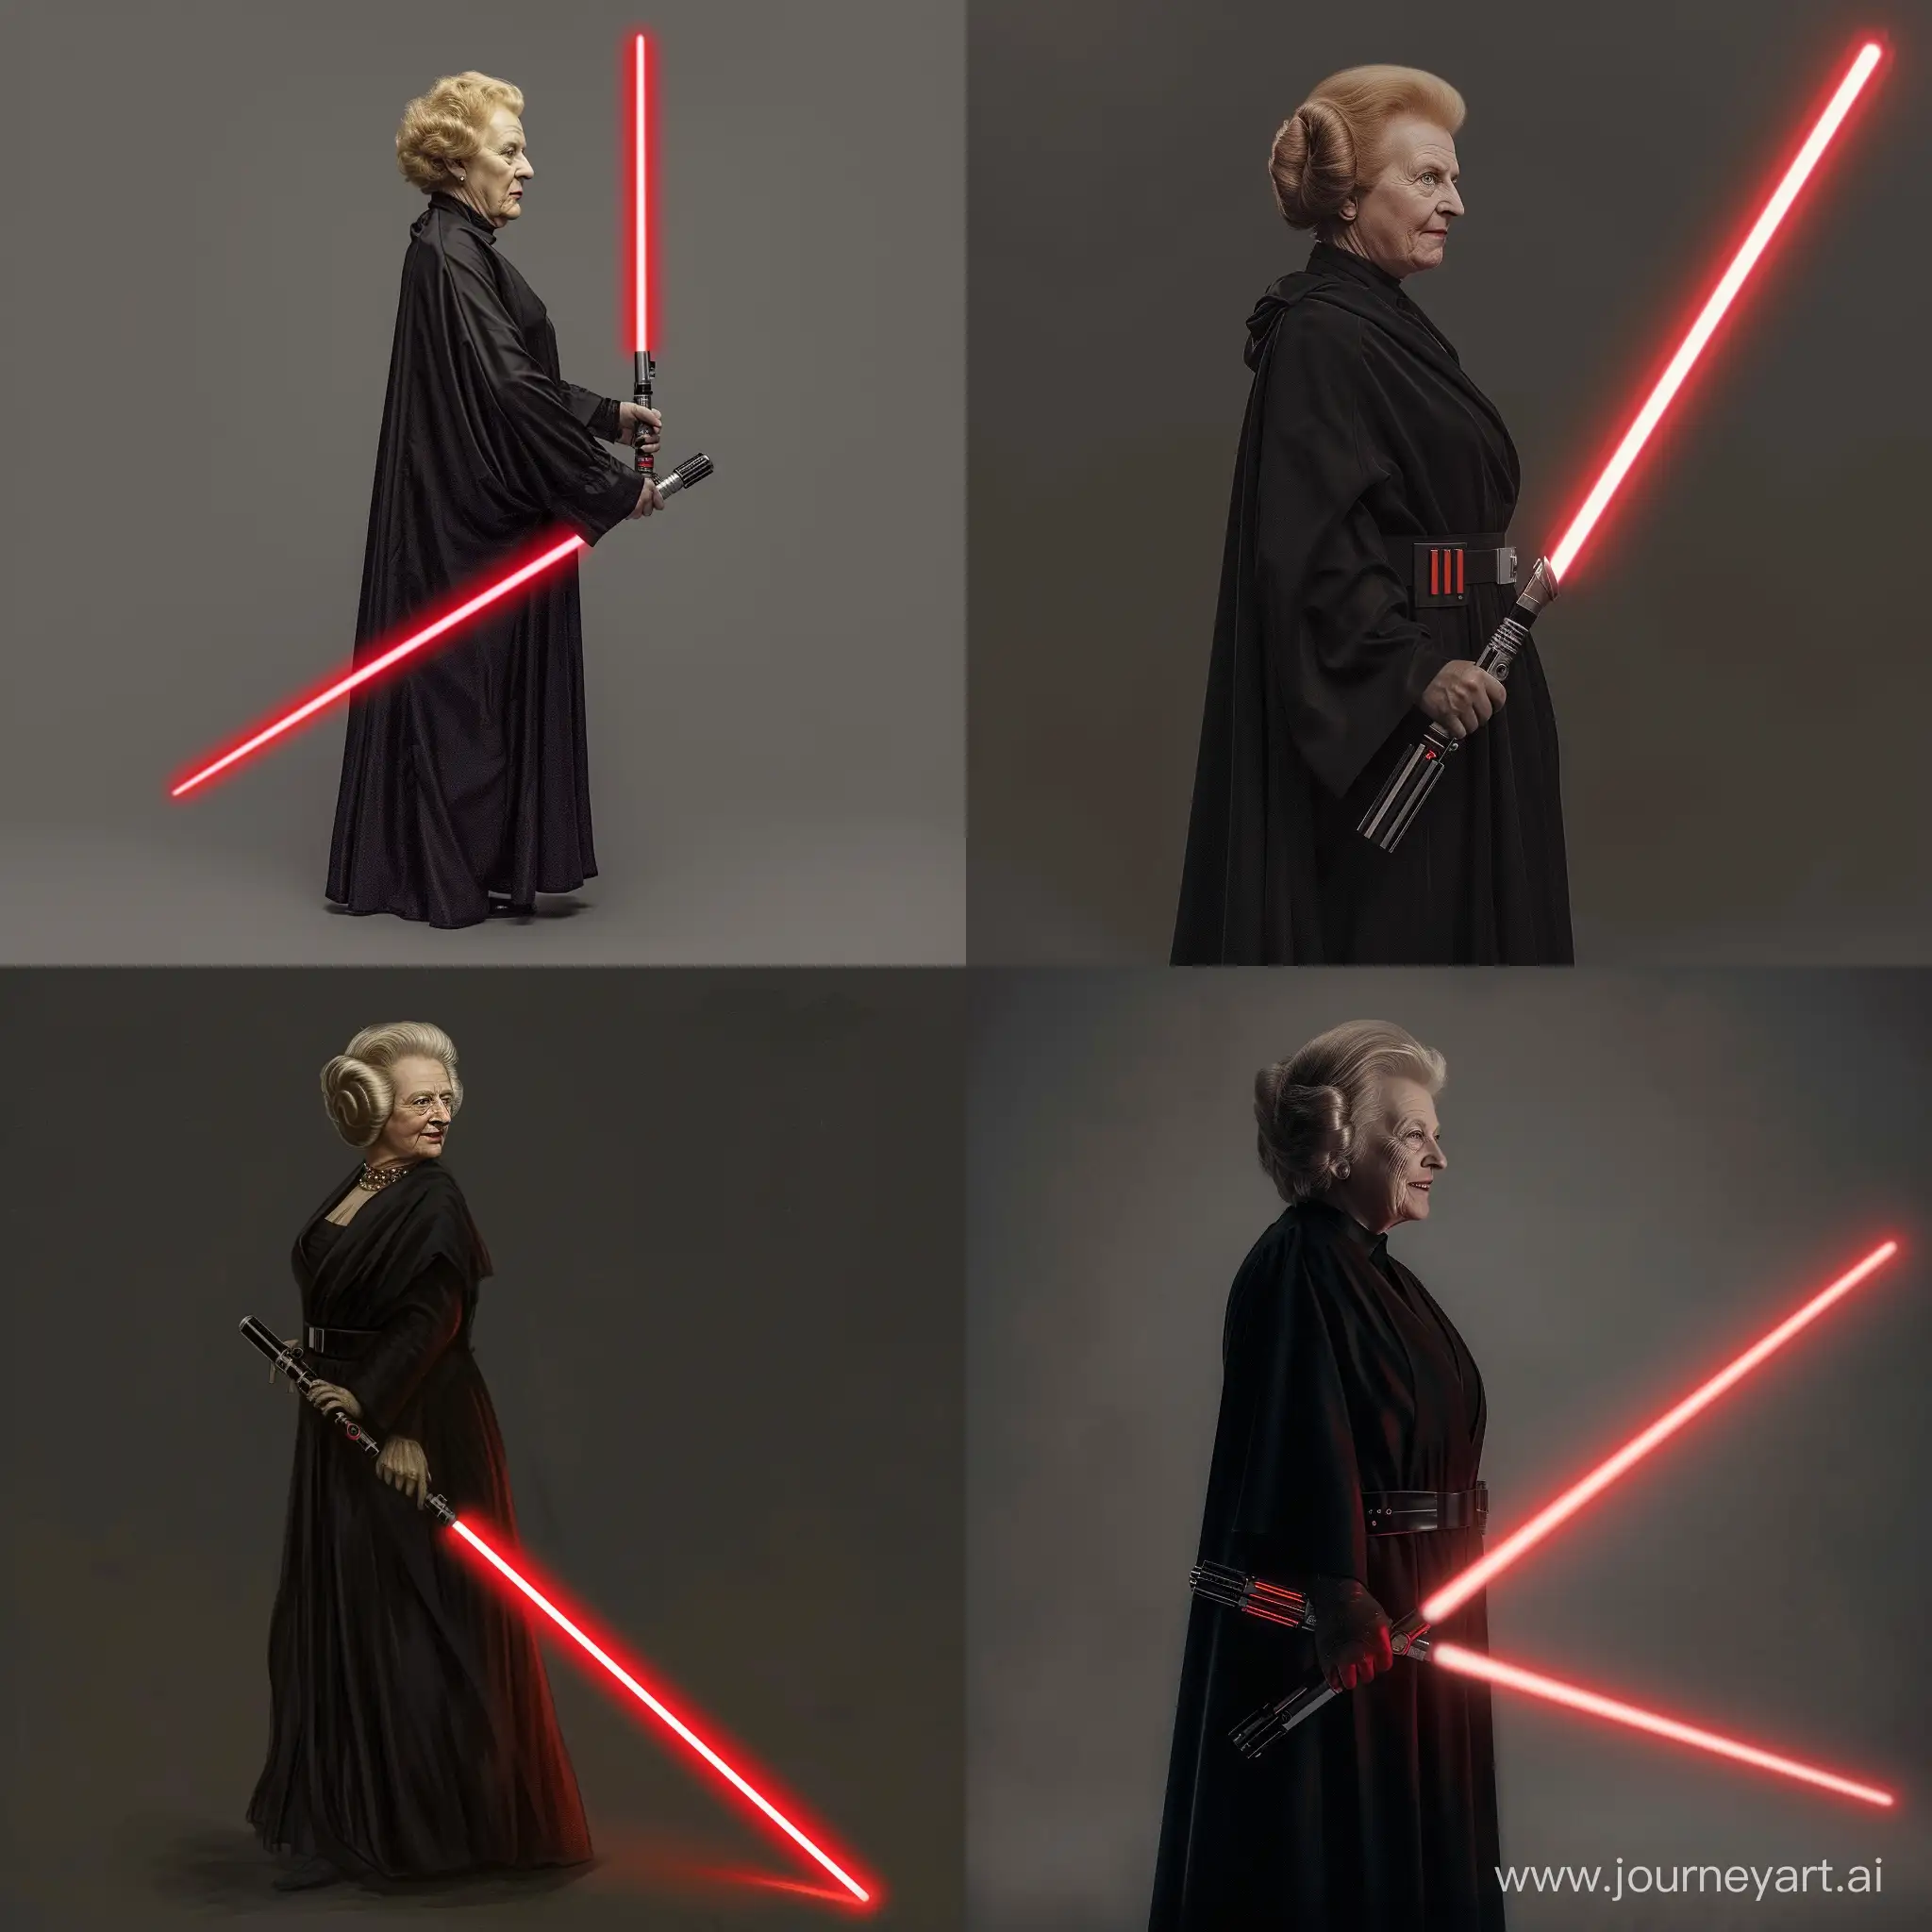 Sith-Leader-Margaret-Thatcher-Wielding-Red-Lightsaber-in-a-Commanding-Stance